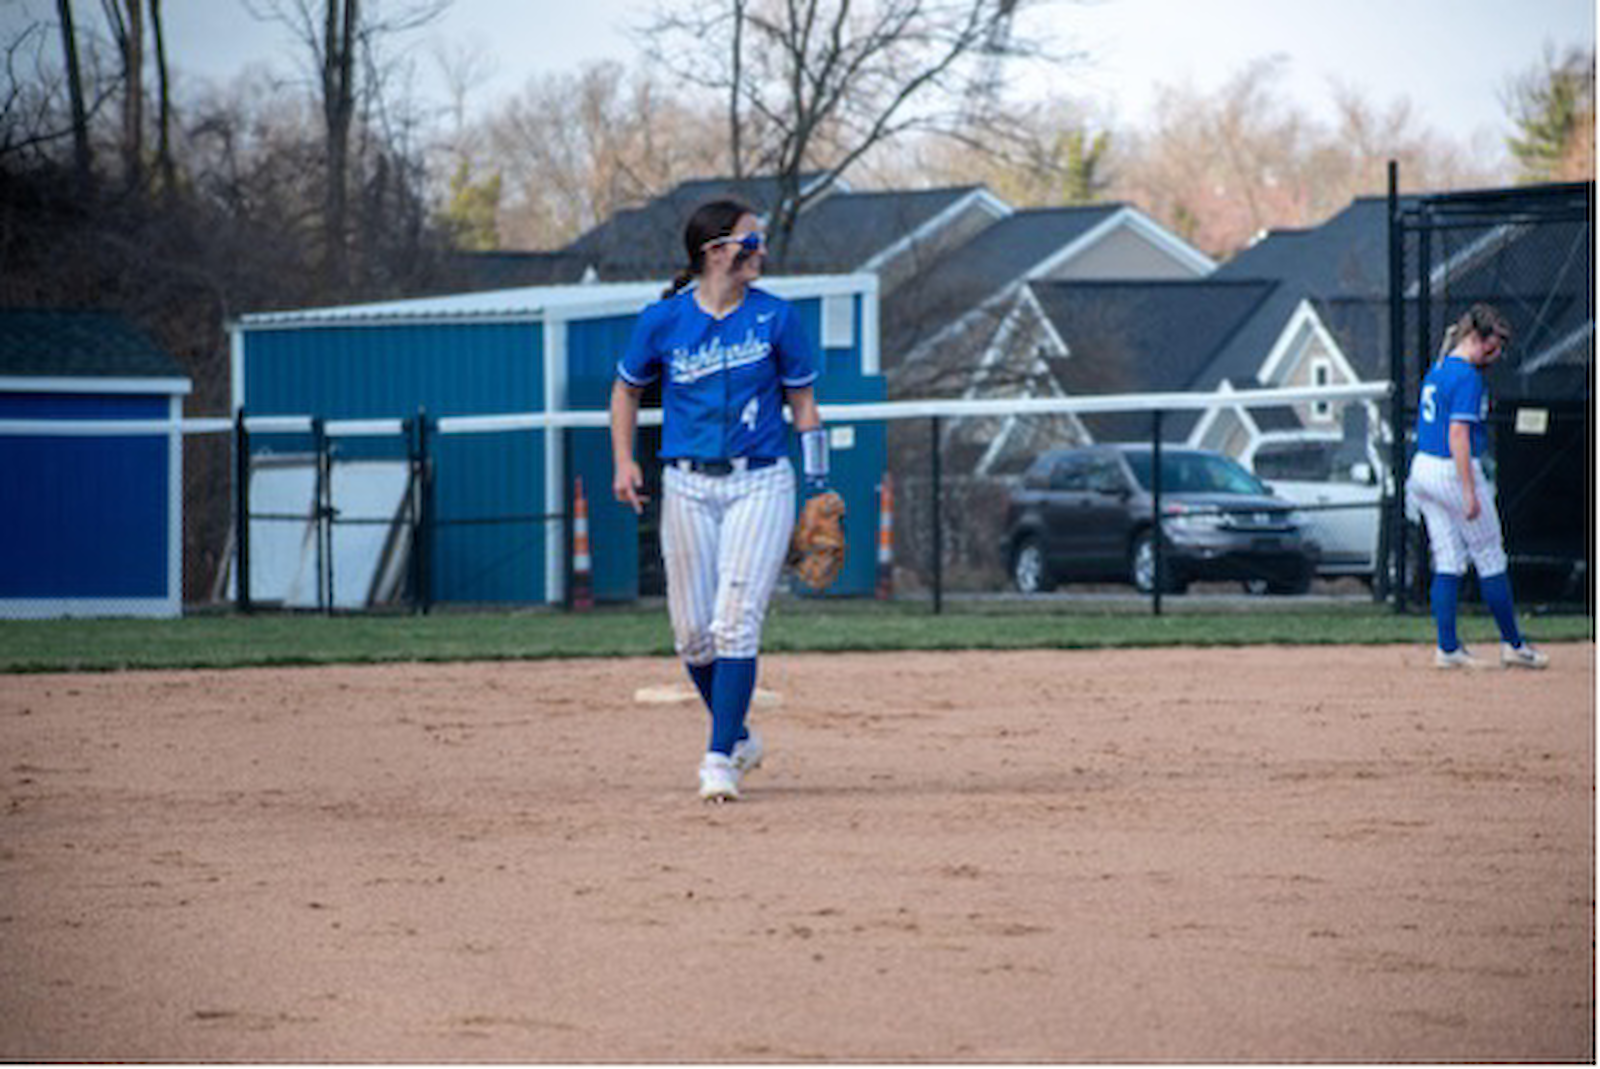 HHS Girls Softball team wins against Ryle in their first scrimmage (Jenna Richey) gallery cover photo